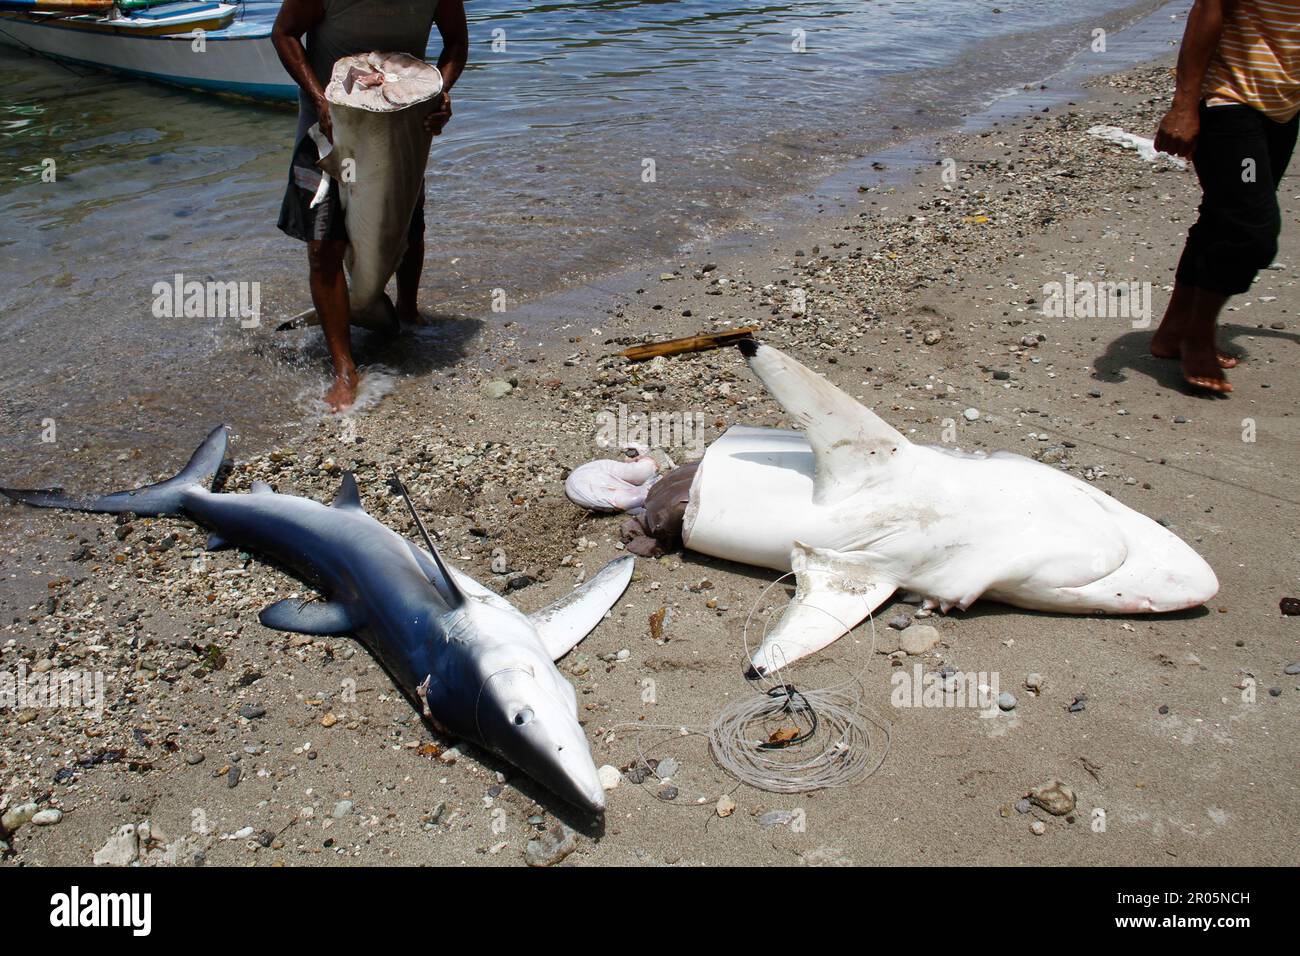 Sharks caught by traditional fishermen are placed on the sand on the beach after being unloaded from fishing boats. Stock Photo